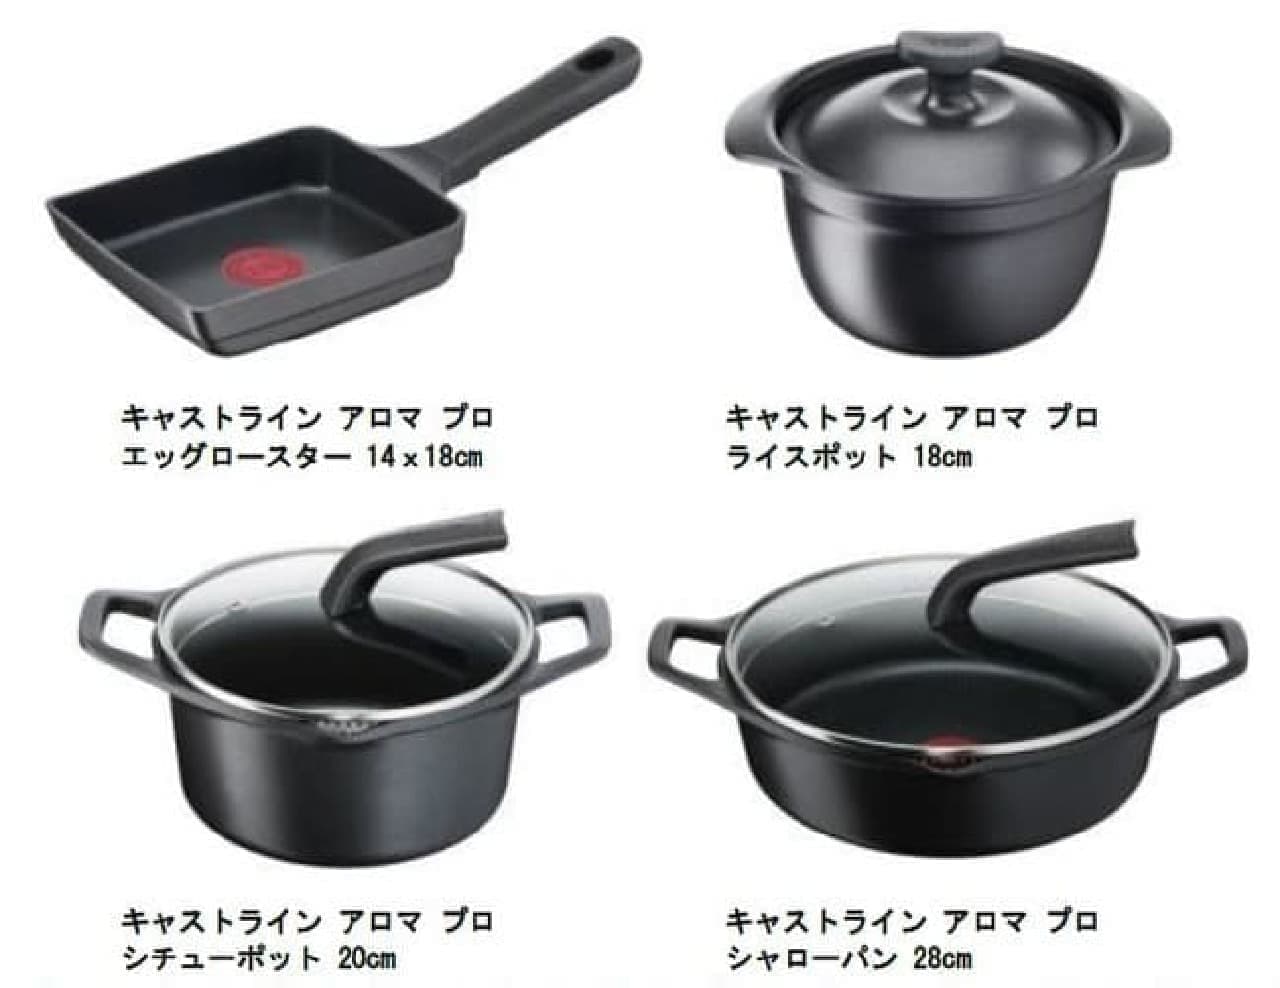 Selectable evercook / Tefal cast line Aroma Pro / ToMay dolce IH compatible multi-pan --Summary of new products for frying pans and pots